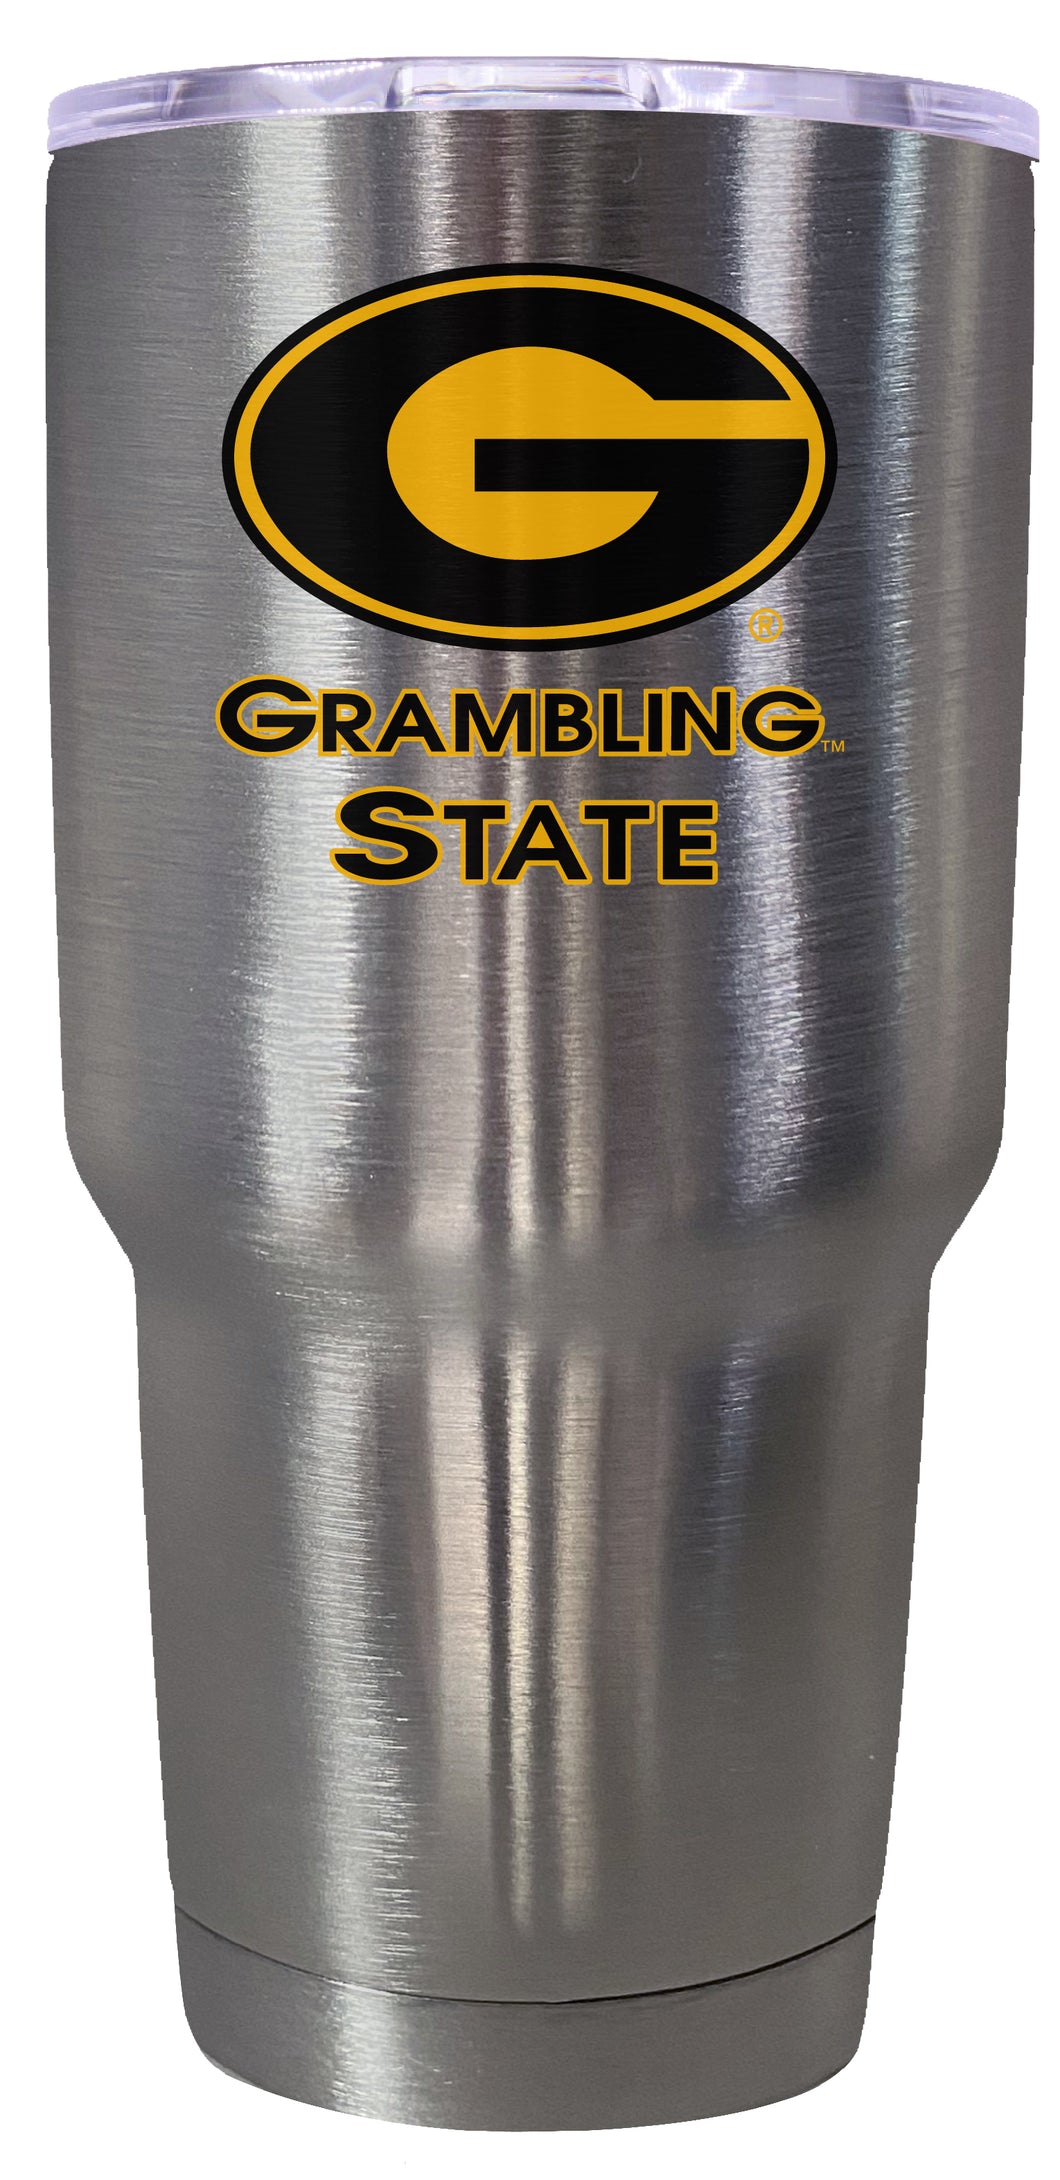 Grambling State Tigers Mascot Logo Tumbler - 24oz Color-Choice Insulated Stainless Steel Mug